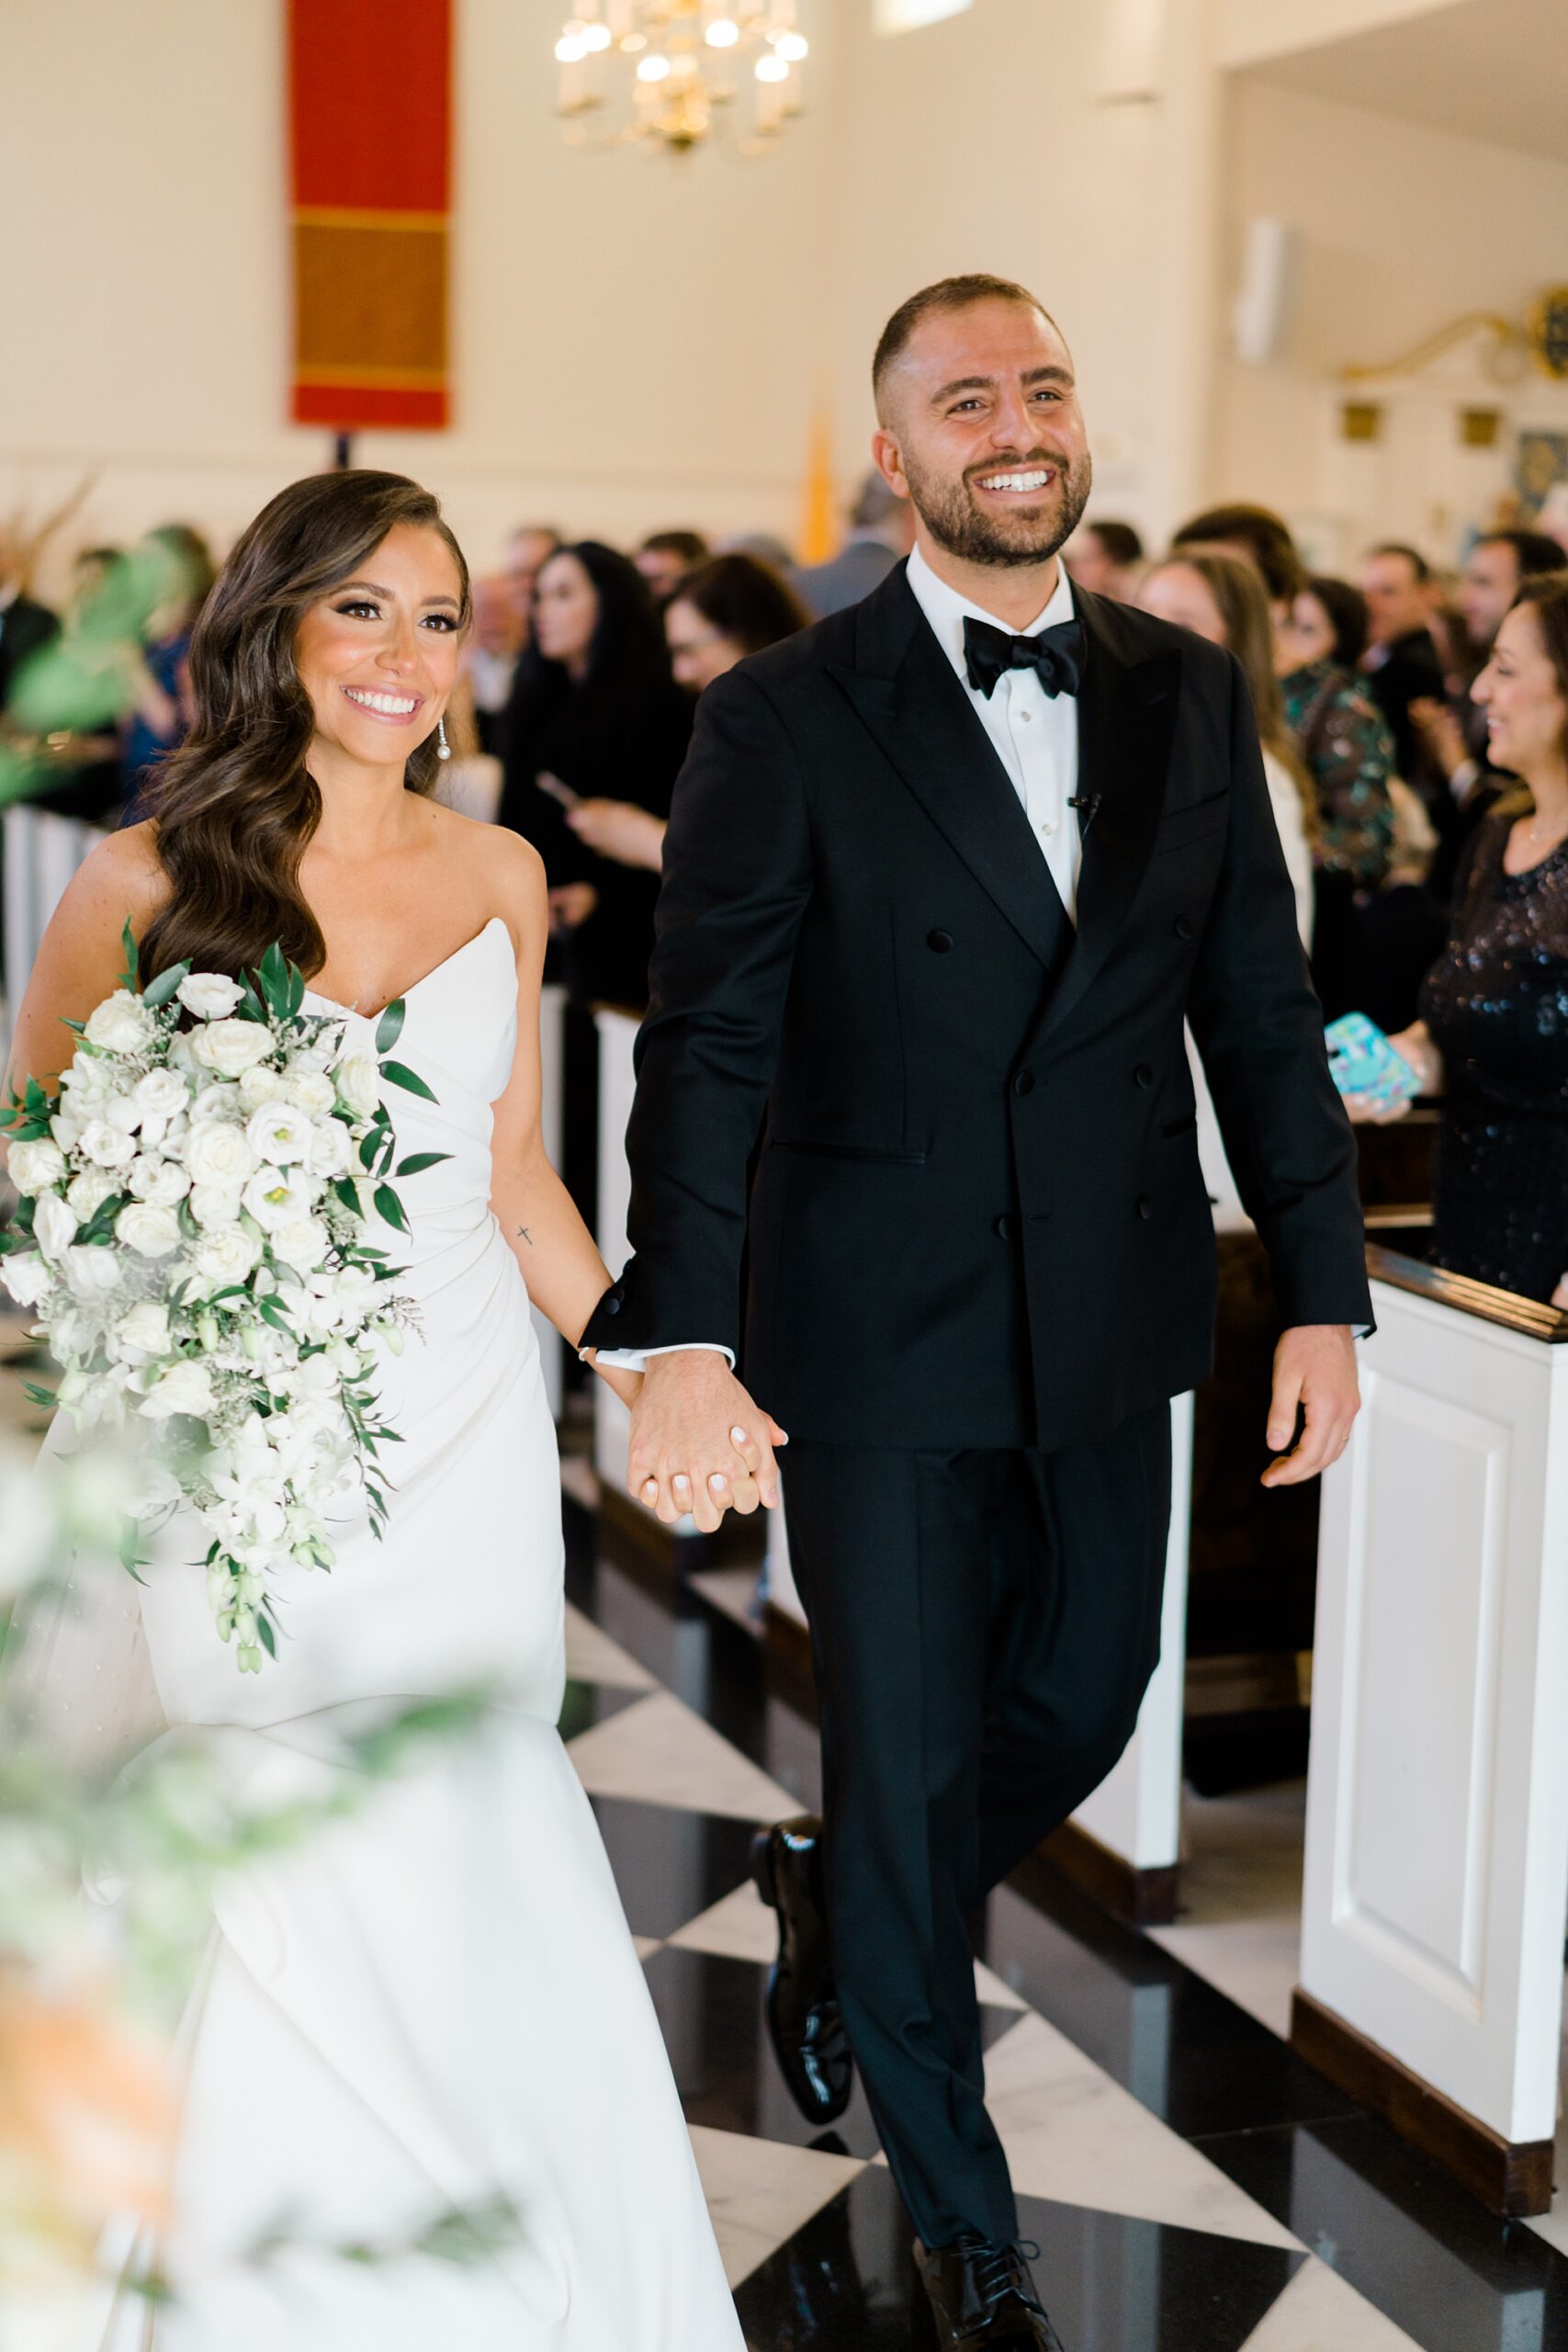 newlyweds are beaming as they exit the church ceremony 